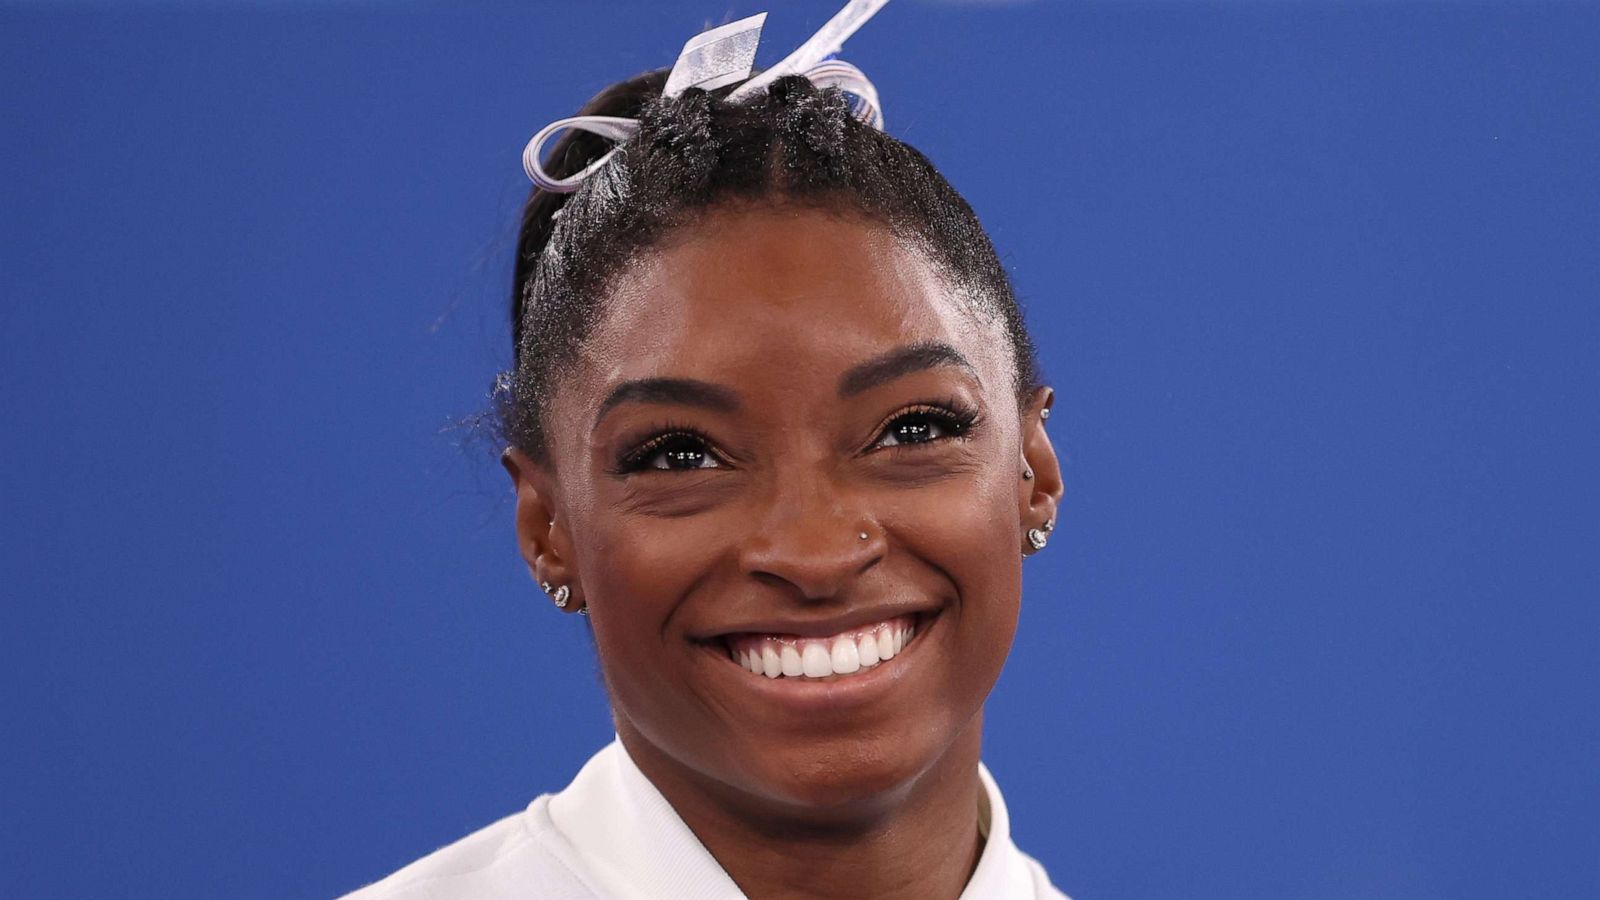 Simone Biles shares mental health revelation in message to fans